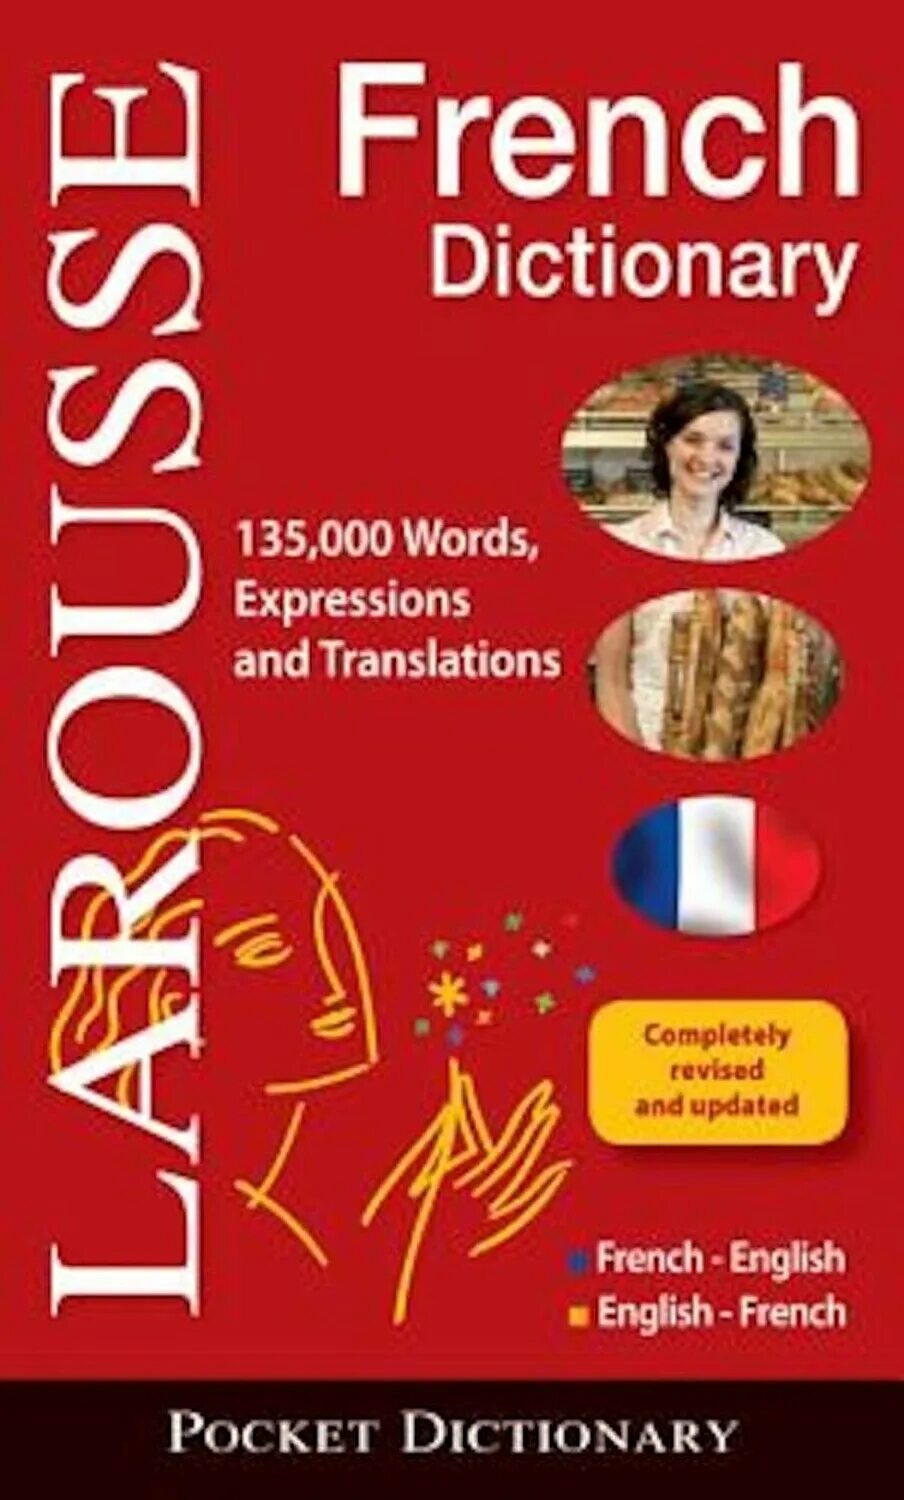 French dictionary. English French Dictionary. French English English French Dictionary. English and French textbooks.